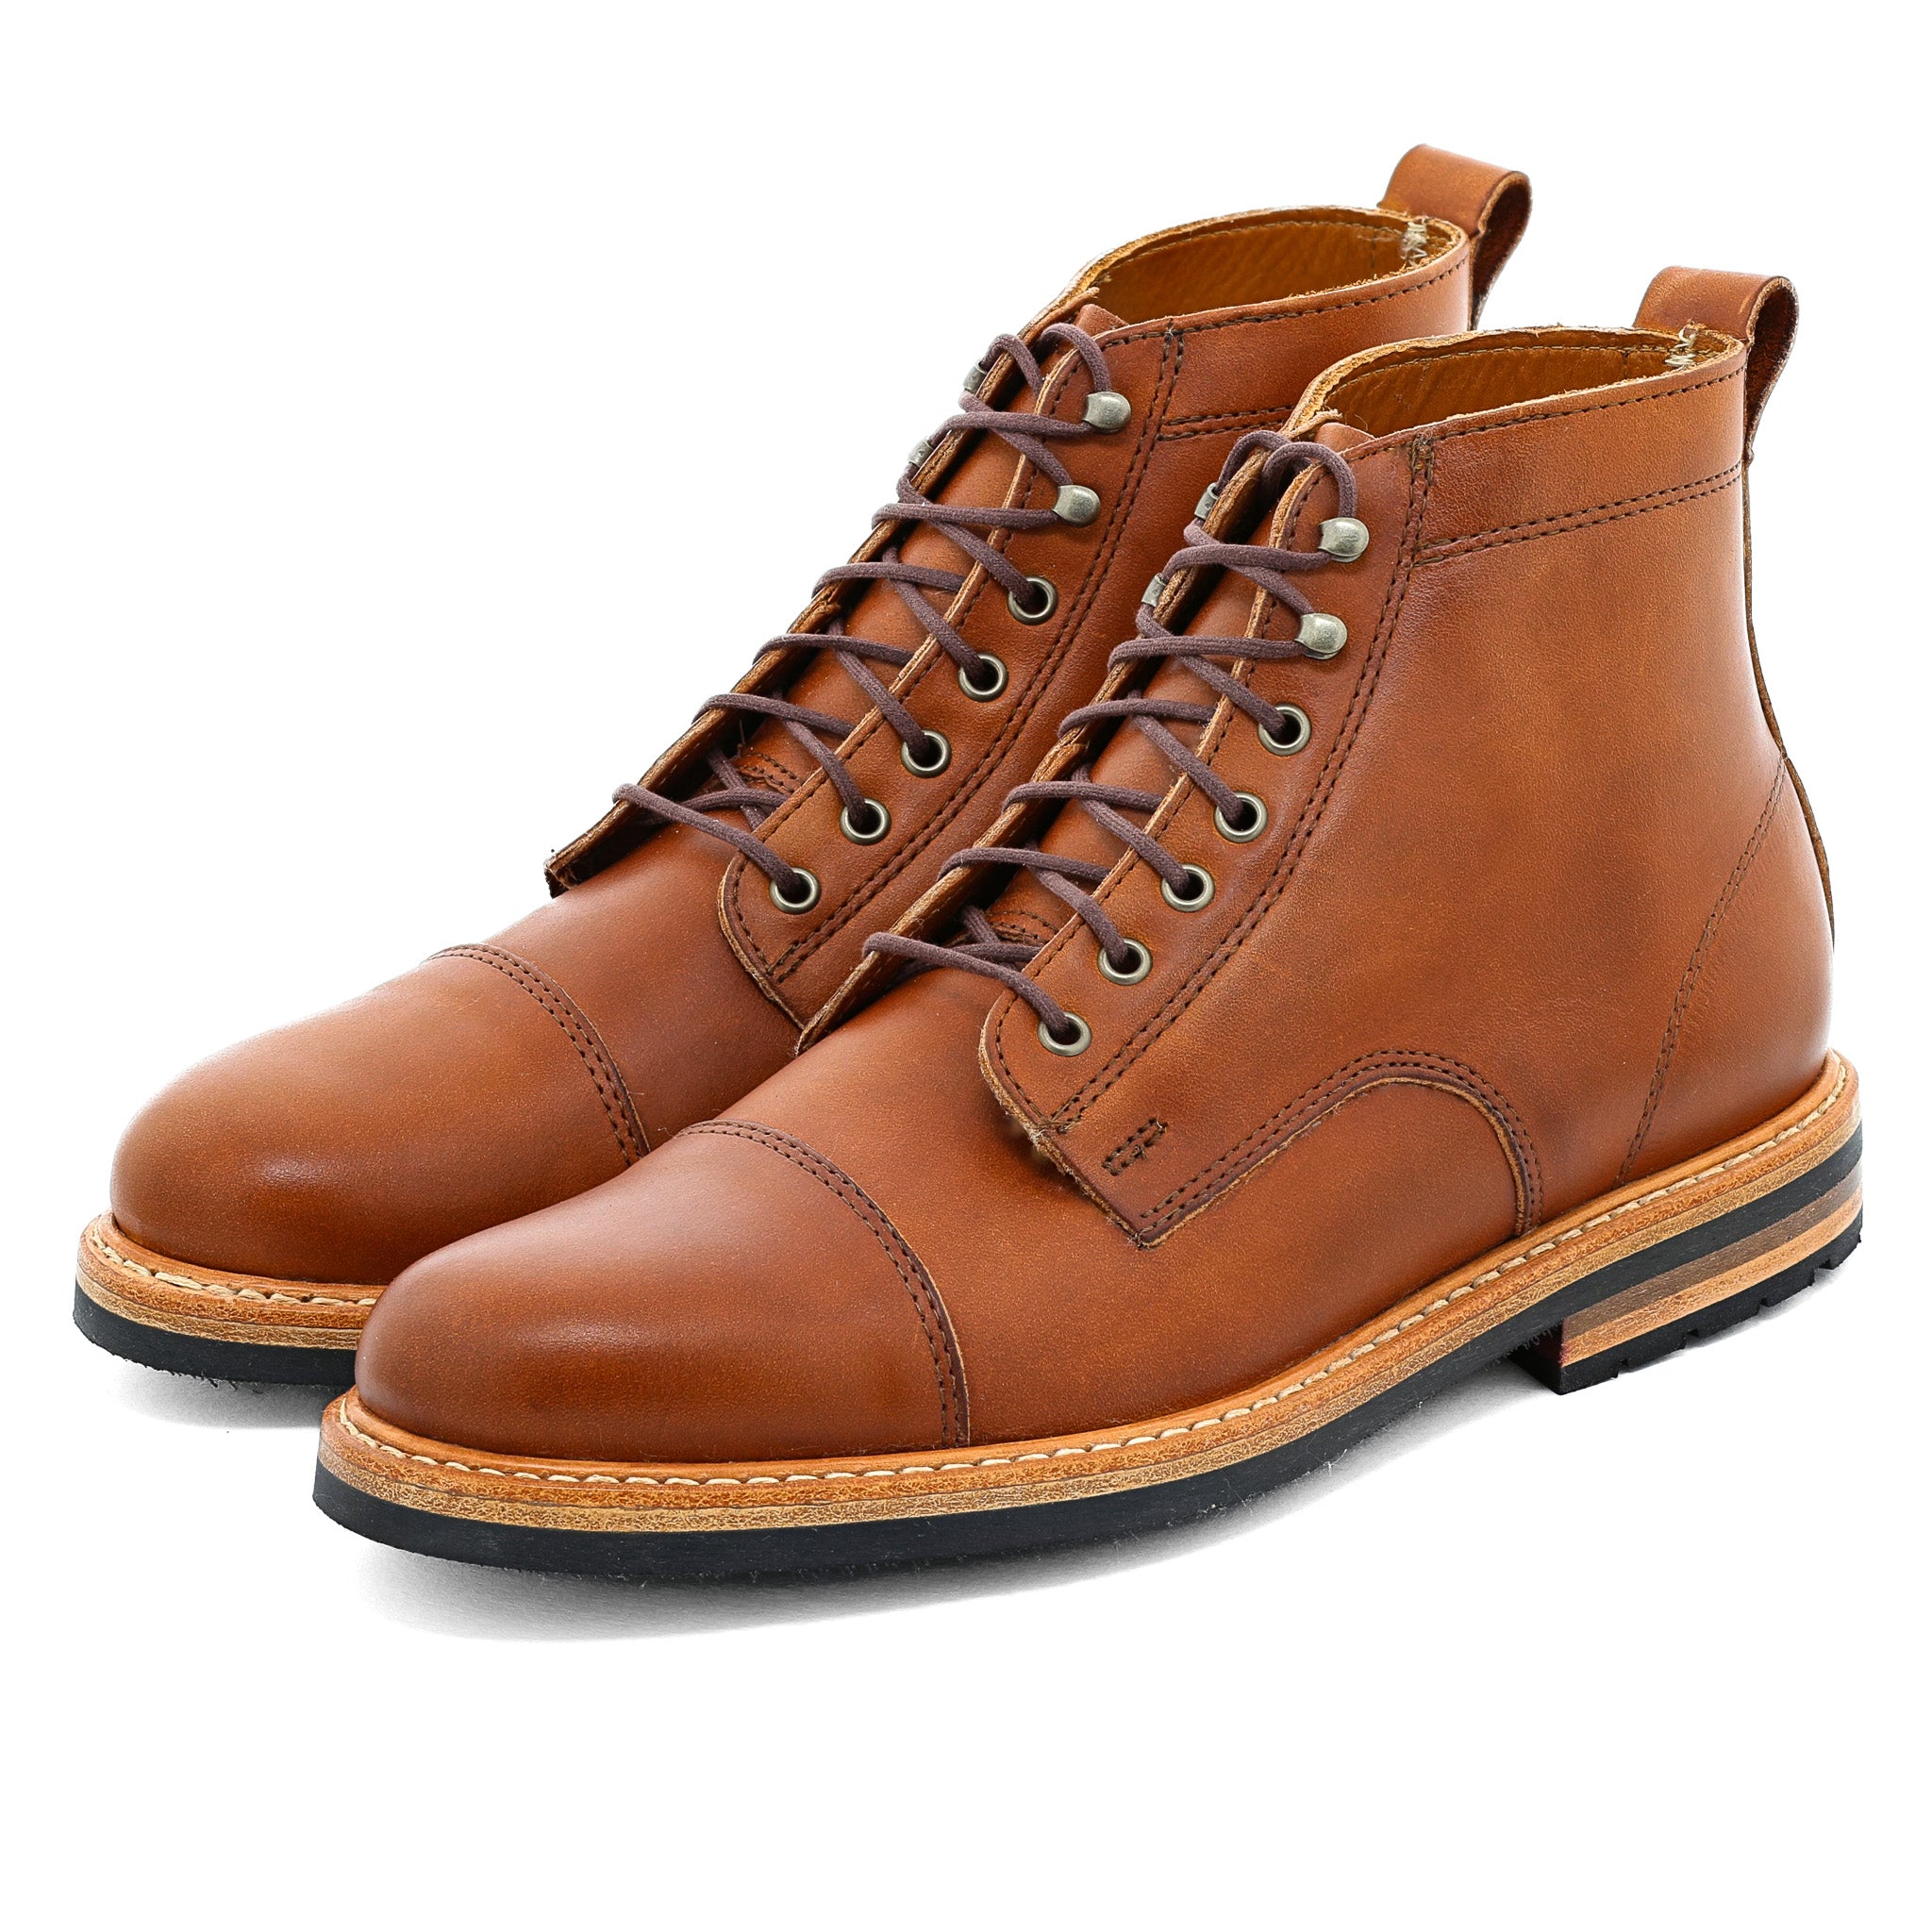 Byron Boot - Tan Bulldog | Rancourt & Co. | Men's Boots and Shoes